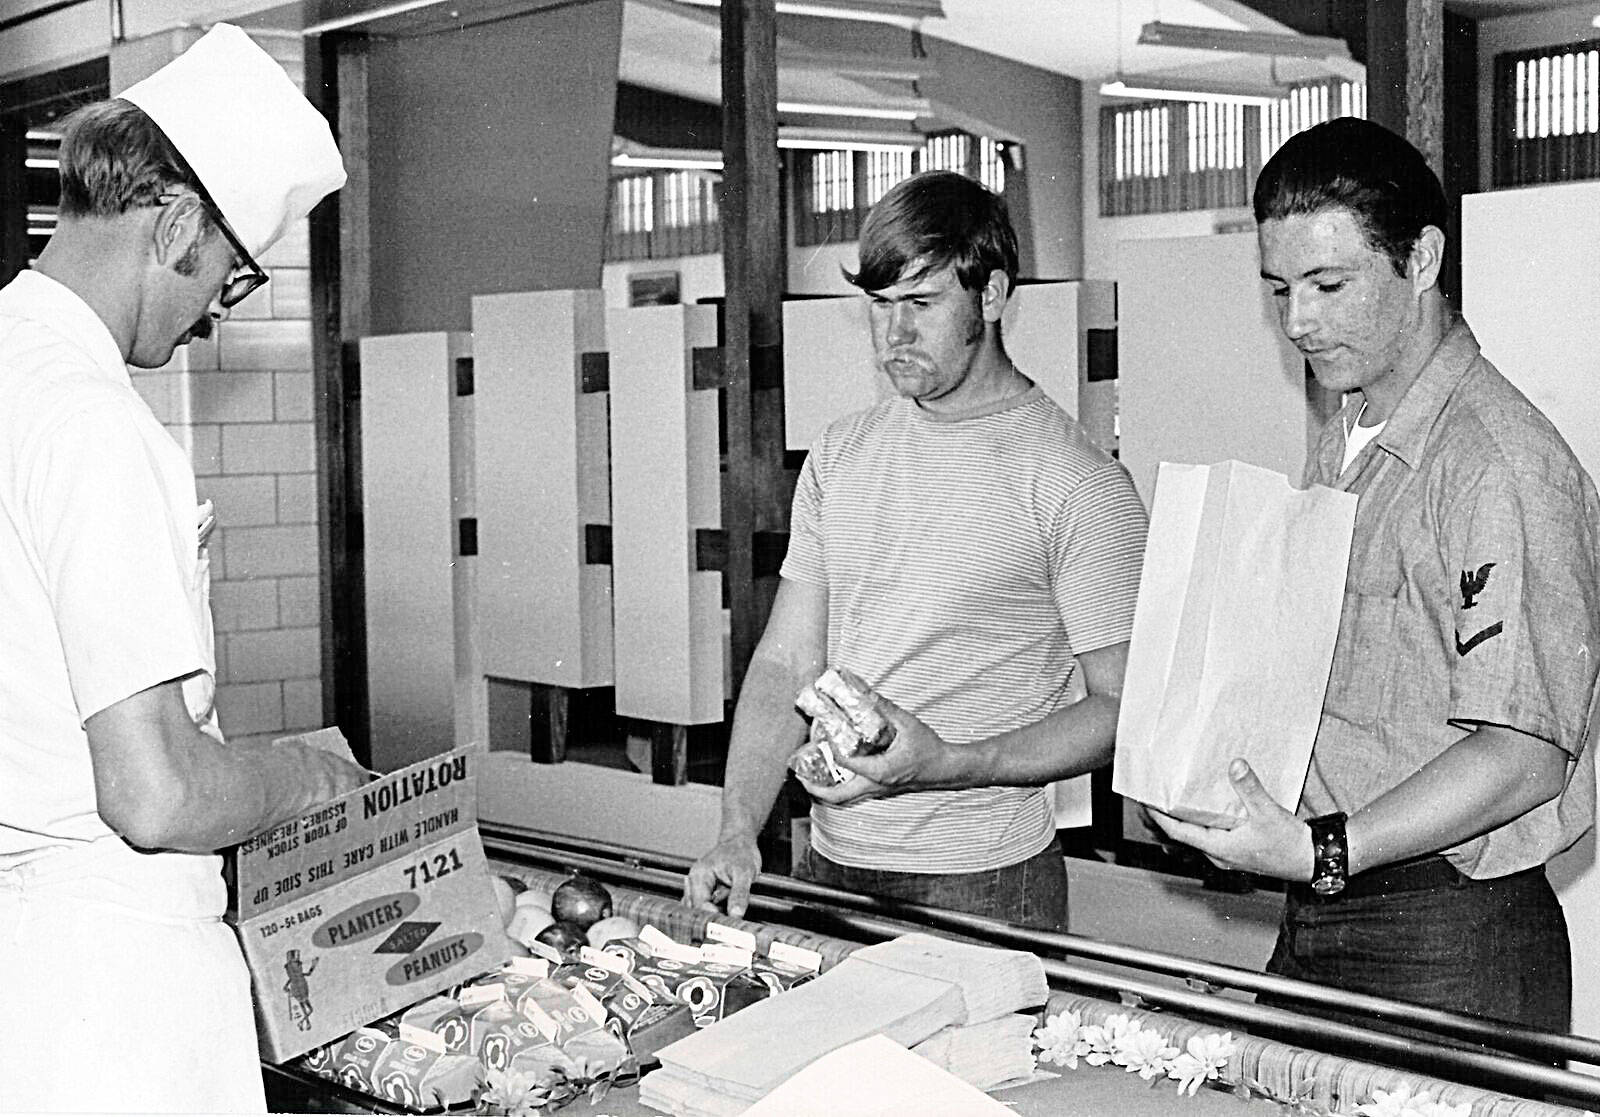 Sailors grab a bite to eat in August 1972.